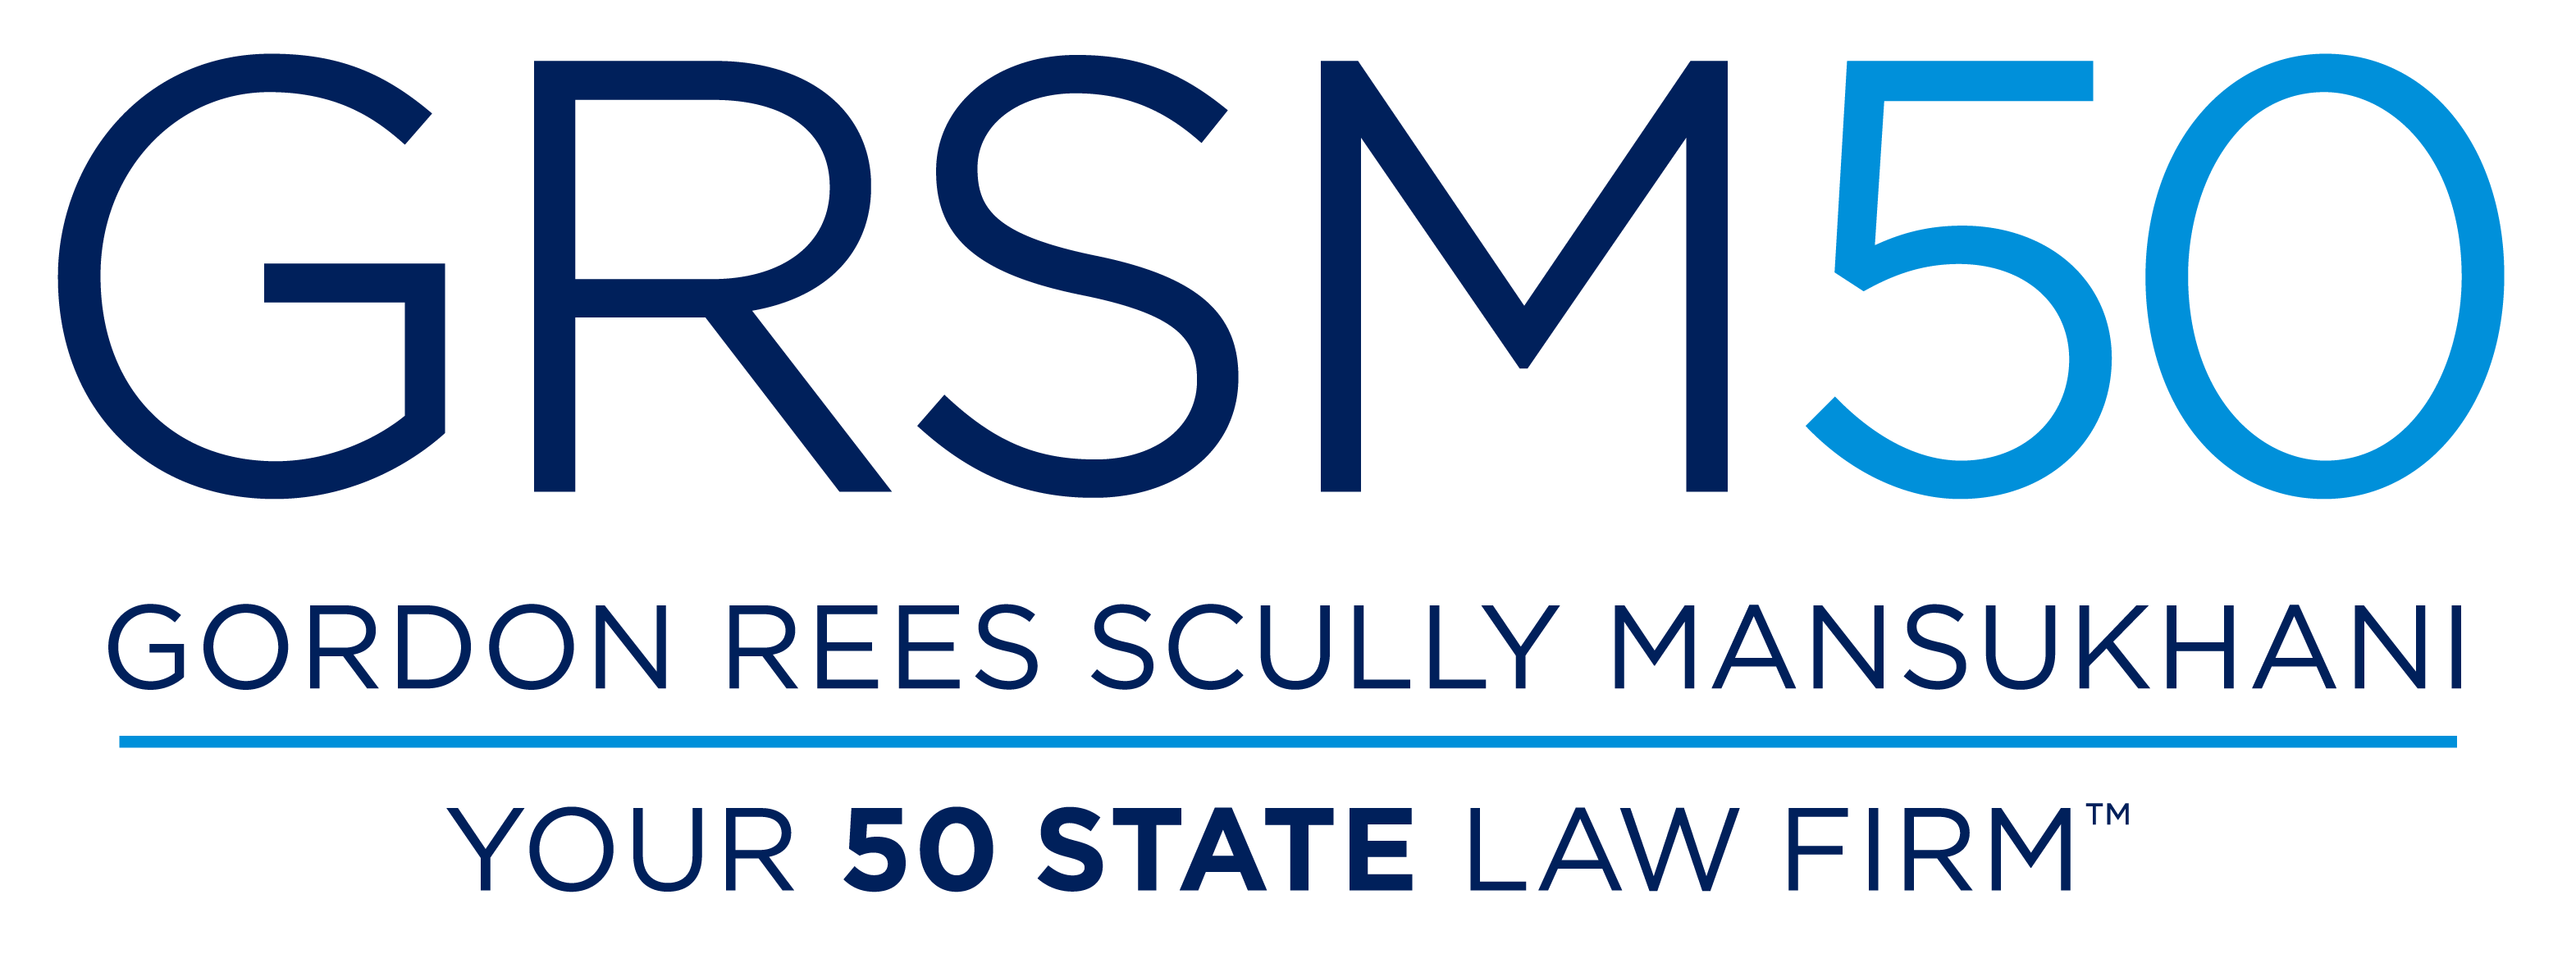 Gordon Rees Scully Mansukhani - Your 50 State Law Firm